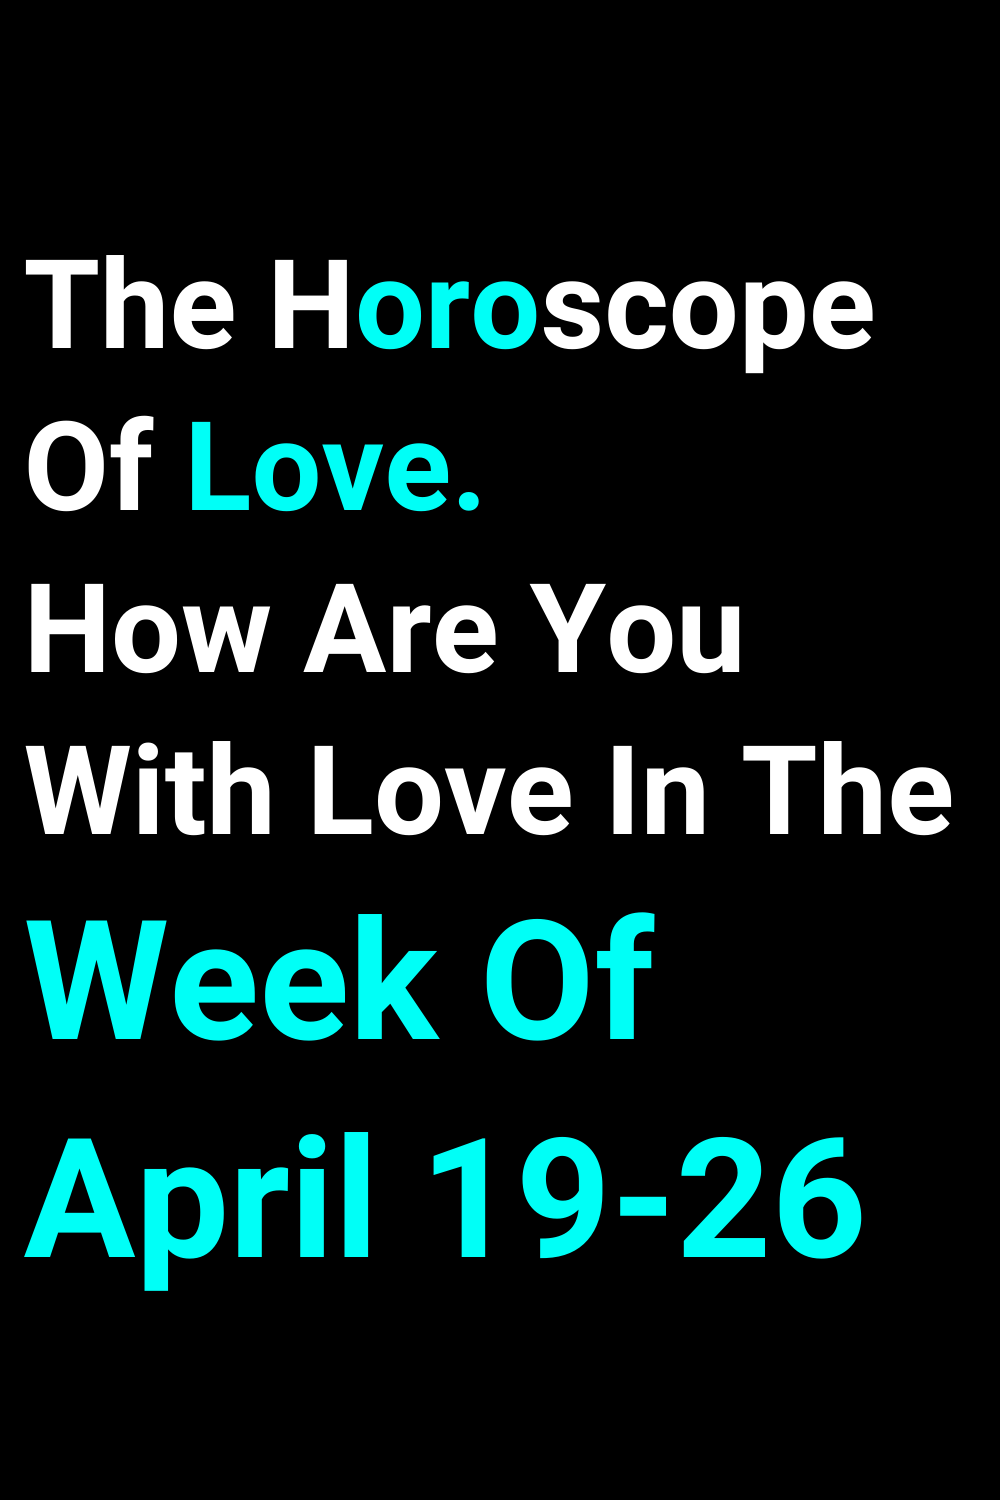 The Horoscope Of Love. How Are You With Love In The Week Of April 19-26